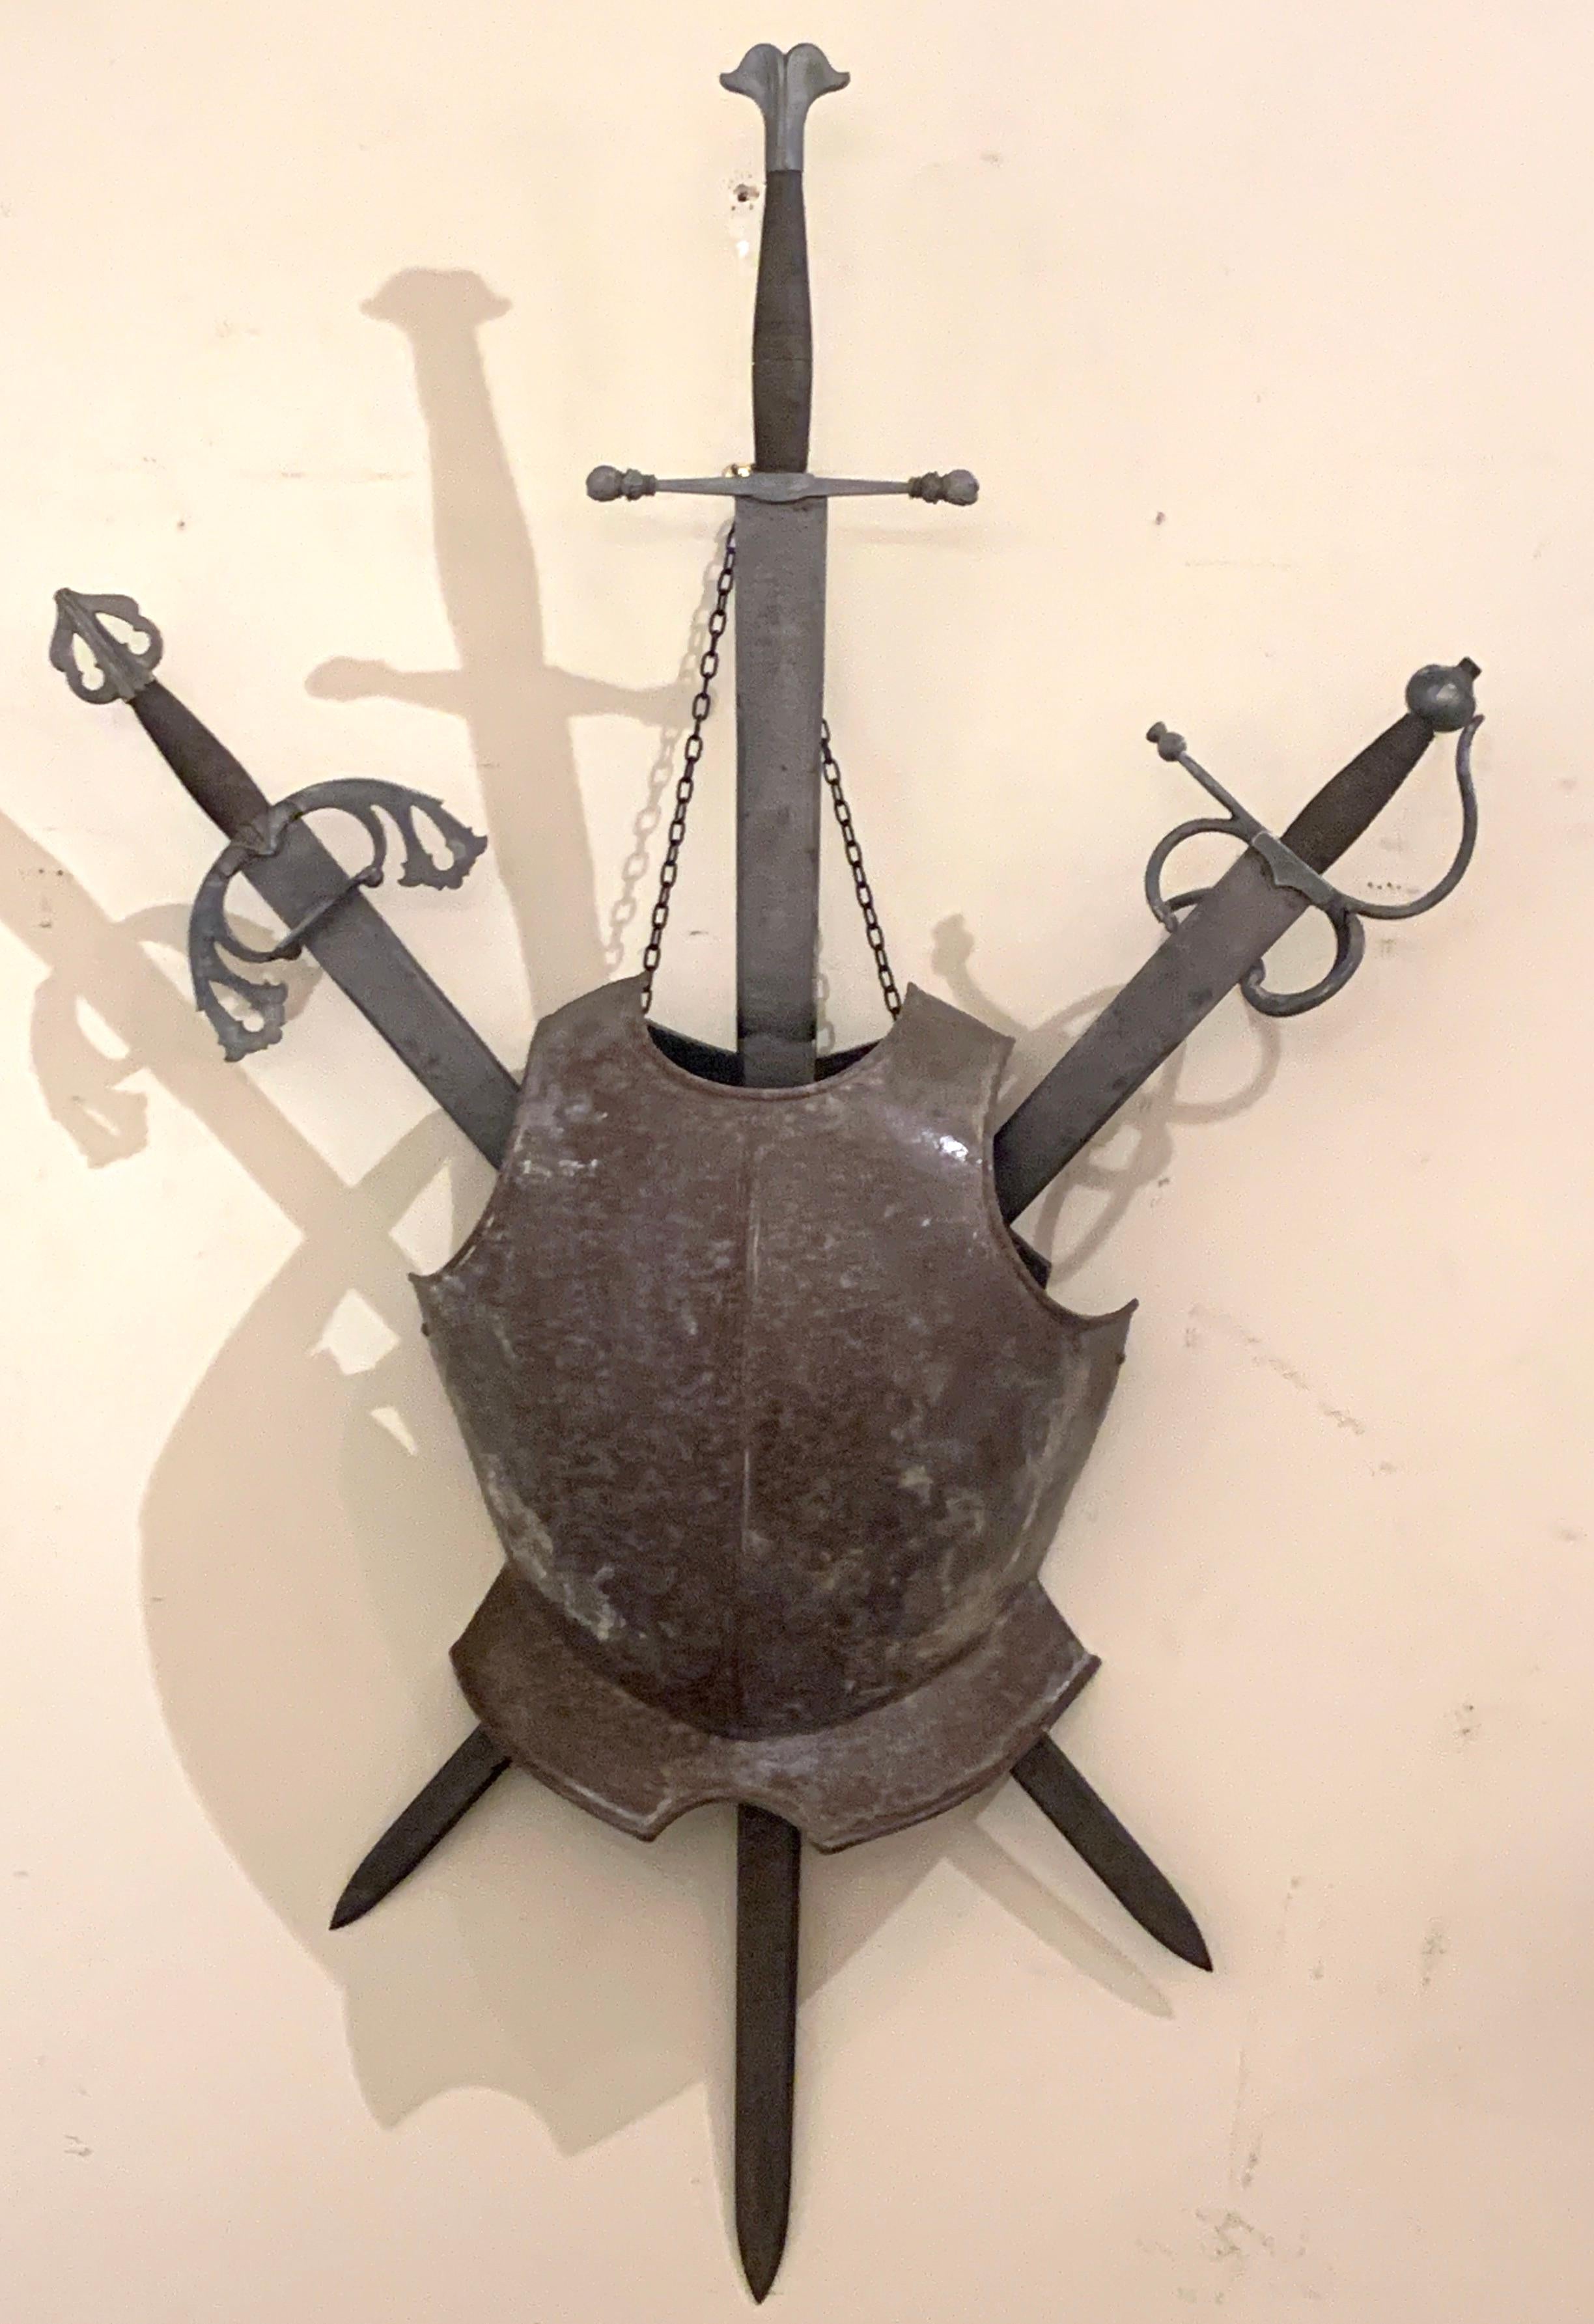 Italian Renaissance style arms and armour wall plaque, consisting of three forged steel and iron swords, with breast plate in front. Hanging on a chain linked wood back.